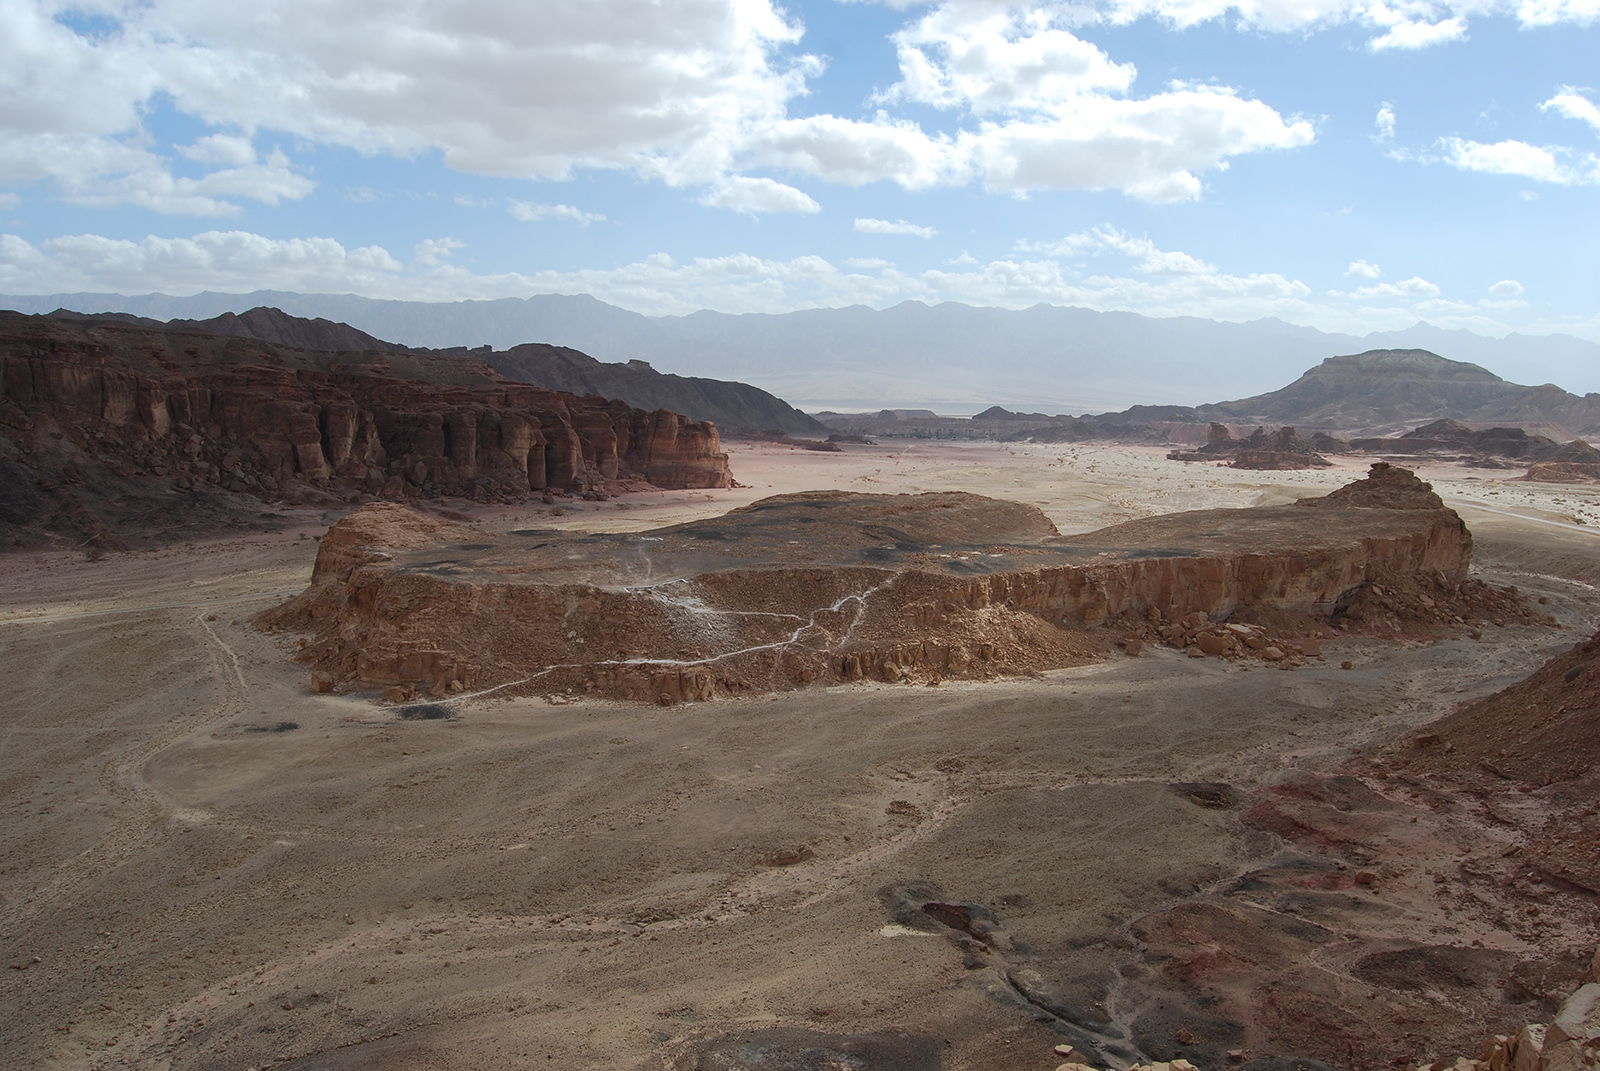 Slaves’ Hill in the center of the Timna Valley. (Photo courtesy of Erez Ben-Yosef and the Central Timna Valley Project)